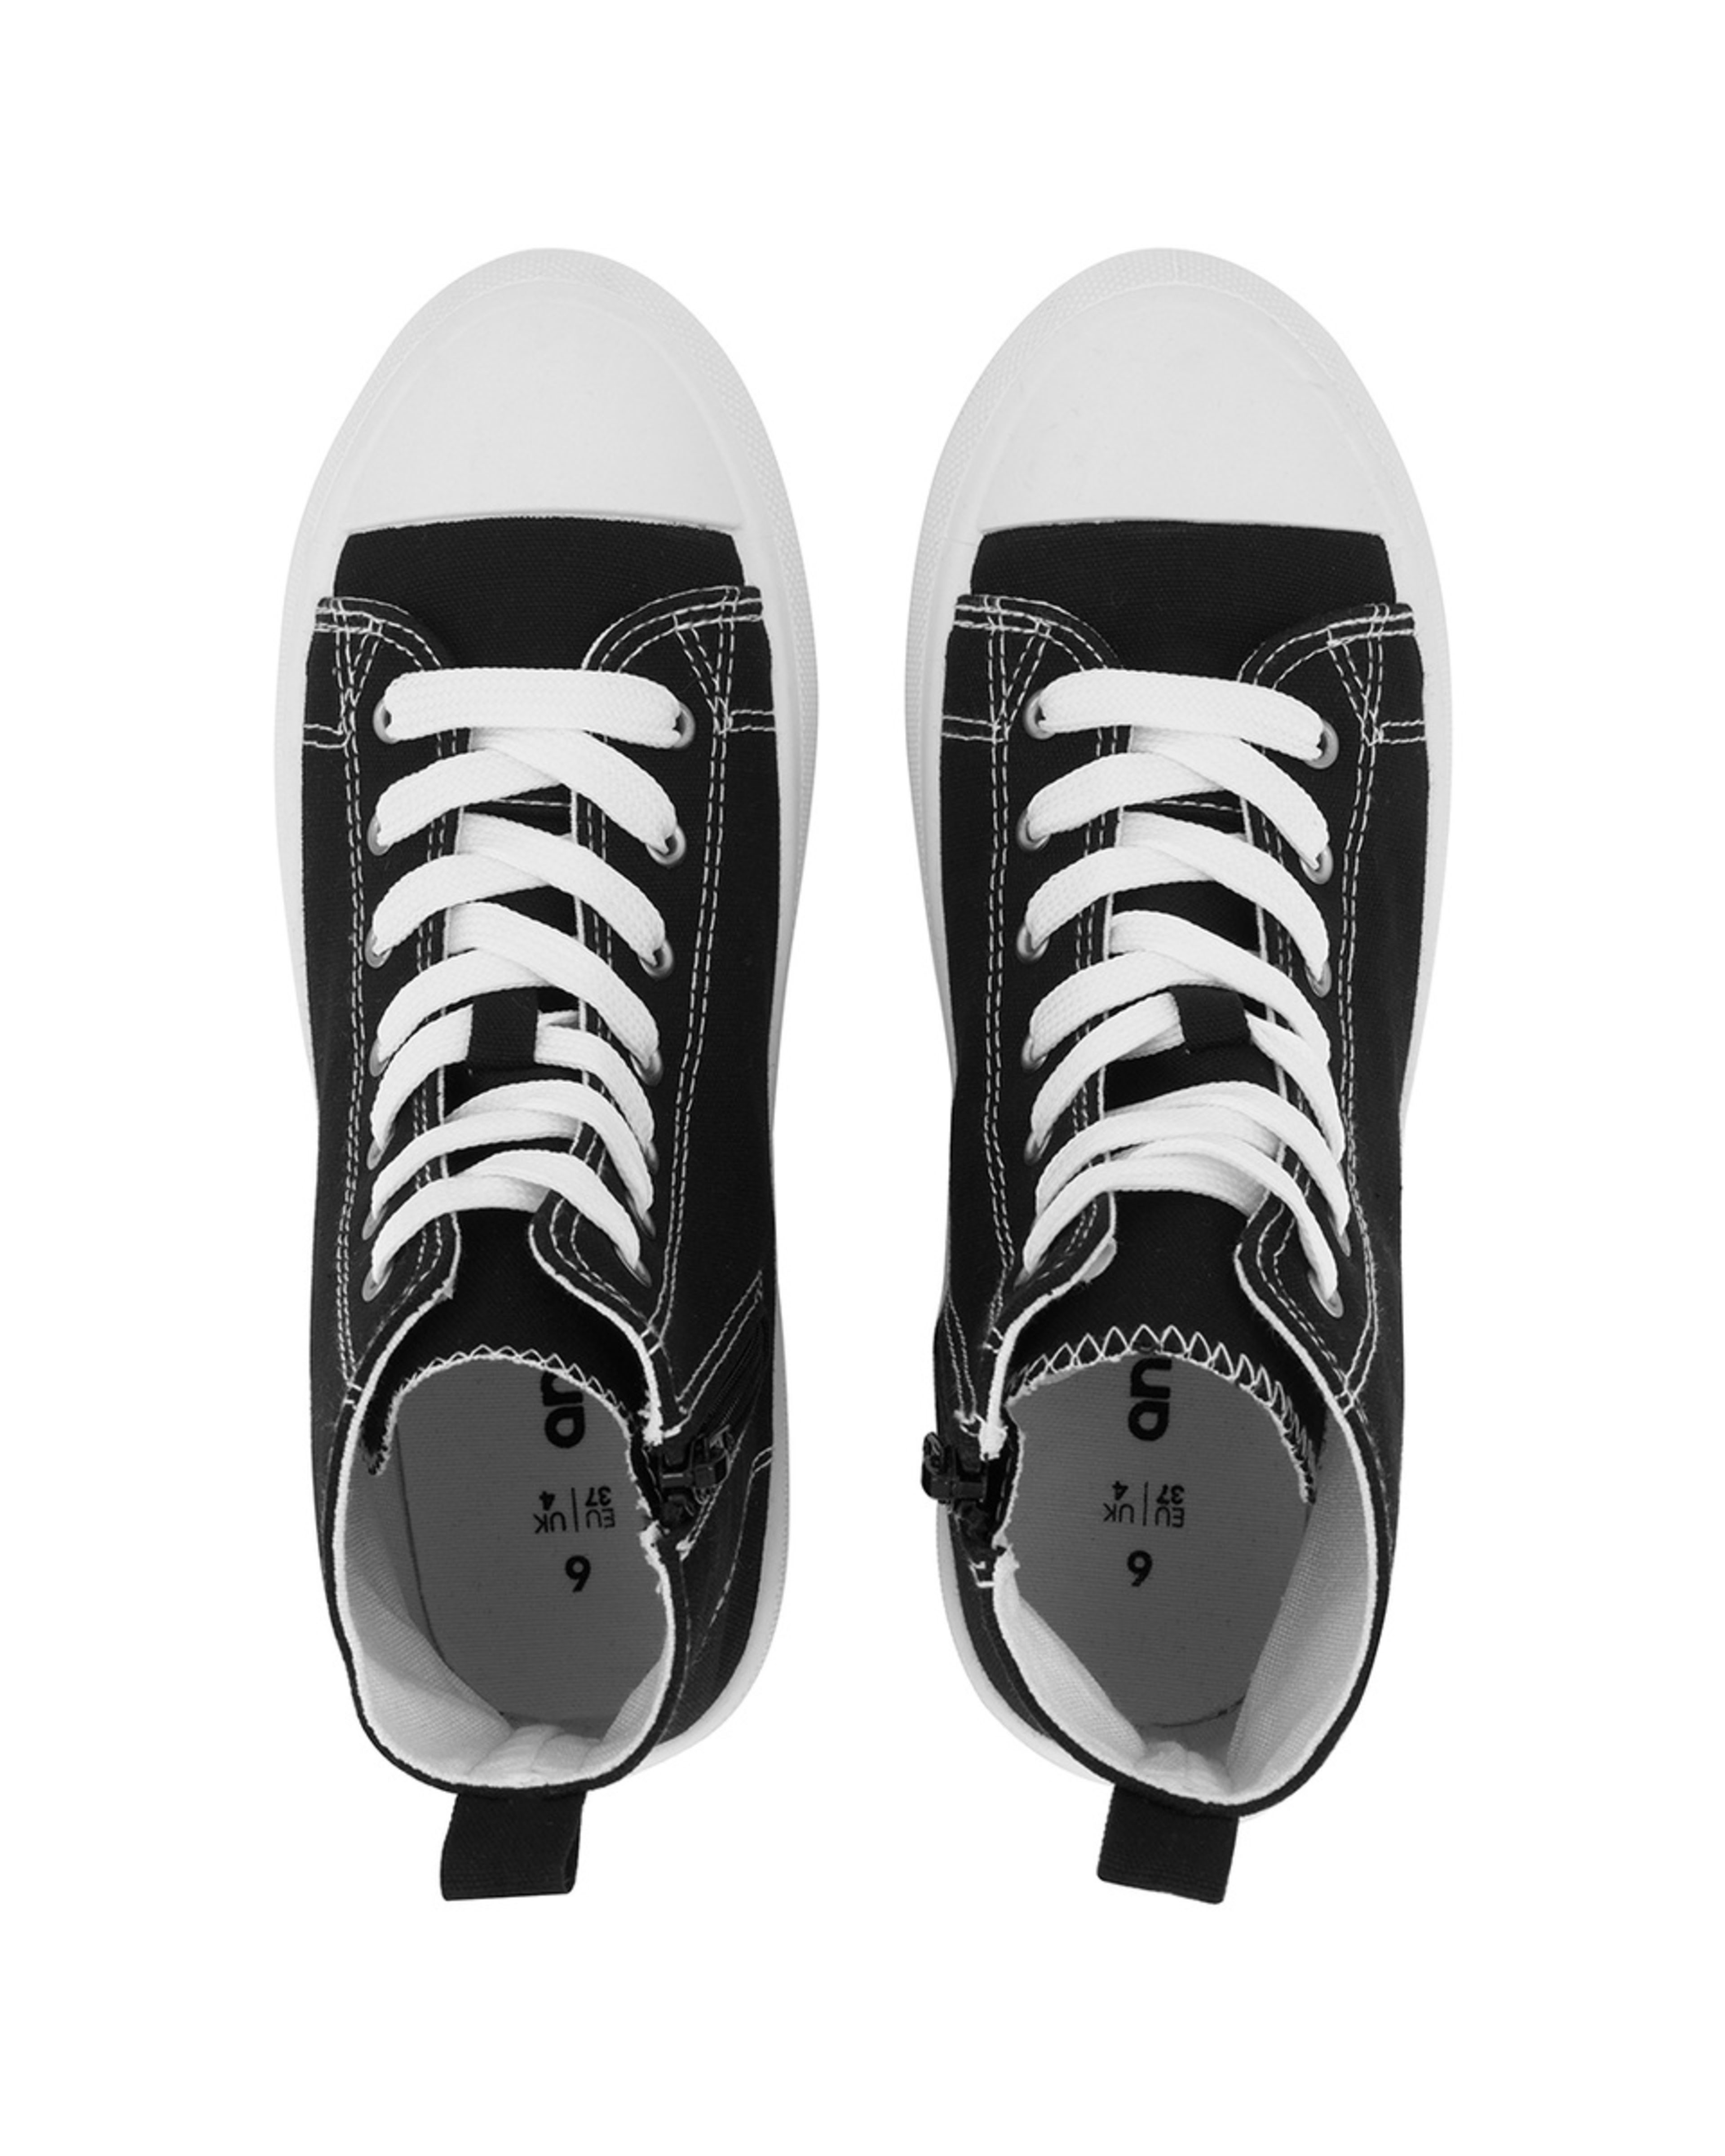 Canvas High Top Sneakers - Kmart